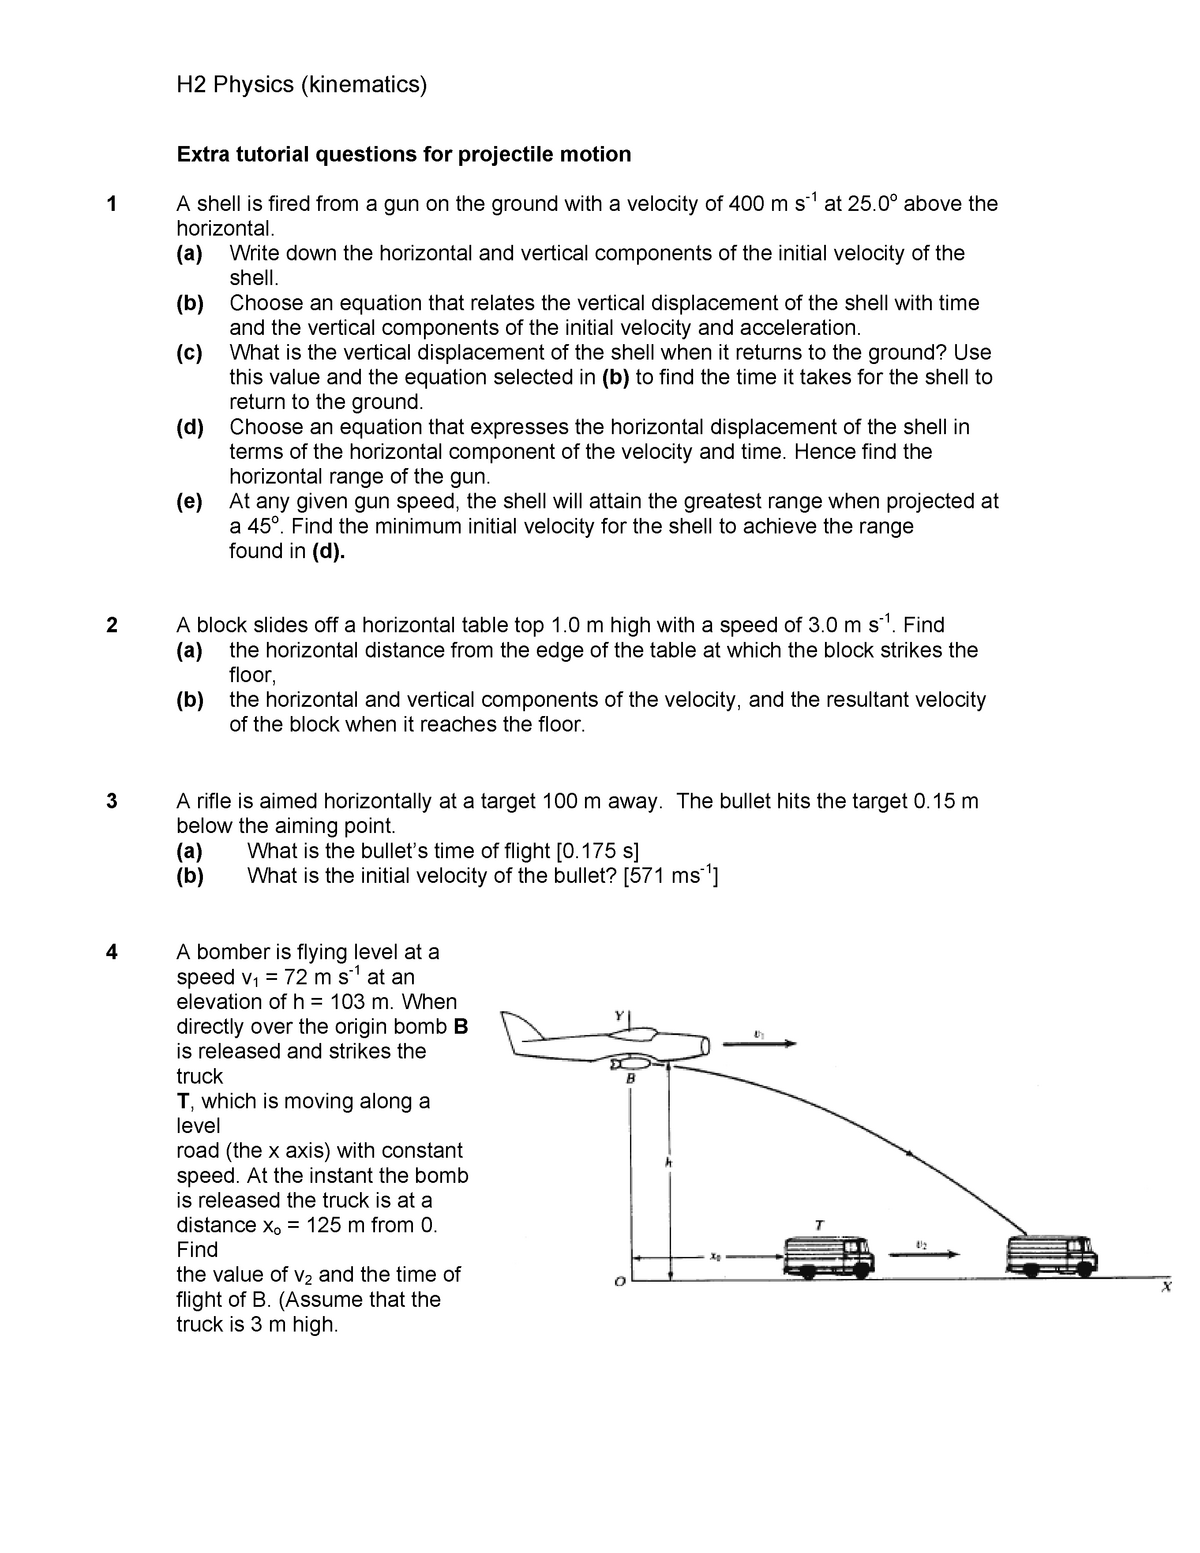 solution-projectile-motion-multiple-choice-questions-with-answers